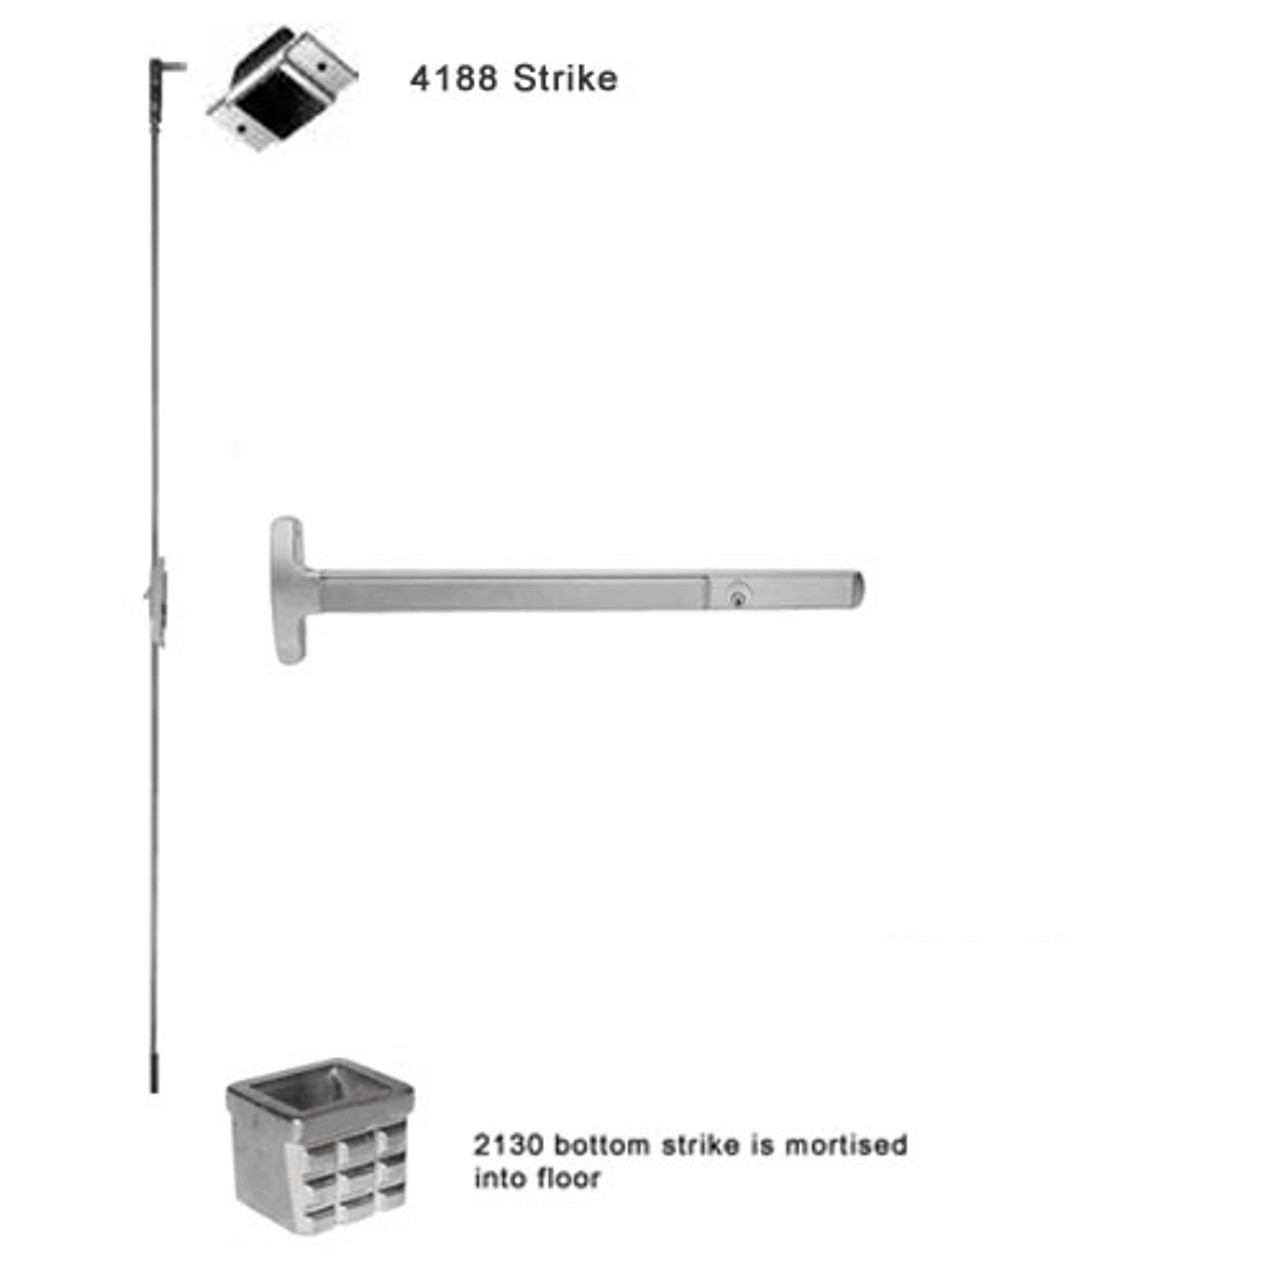 CD24-C-L-BE-DANE-US15-4-LHR Falcon 24 Series Concealed Vertical Rod Device 712L-BE Dane Lever Trim with Blank Escutcheon in Satin Nickel